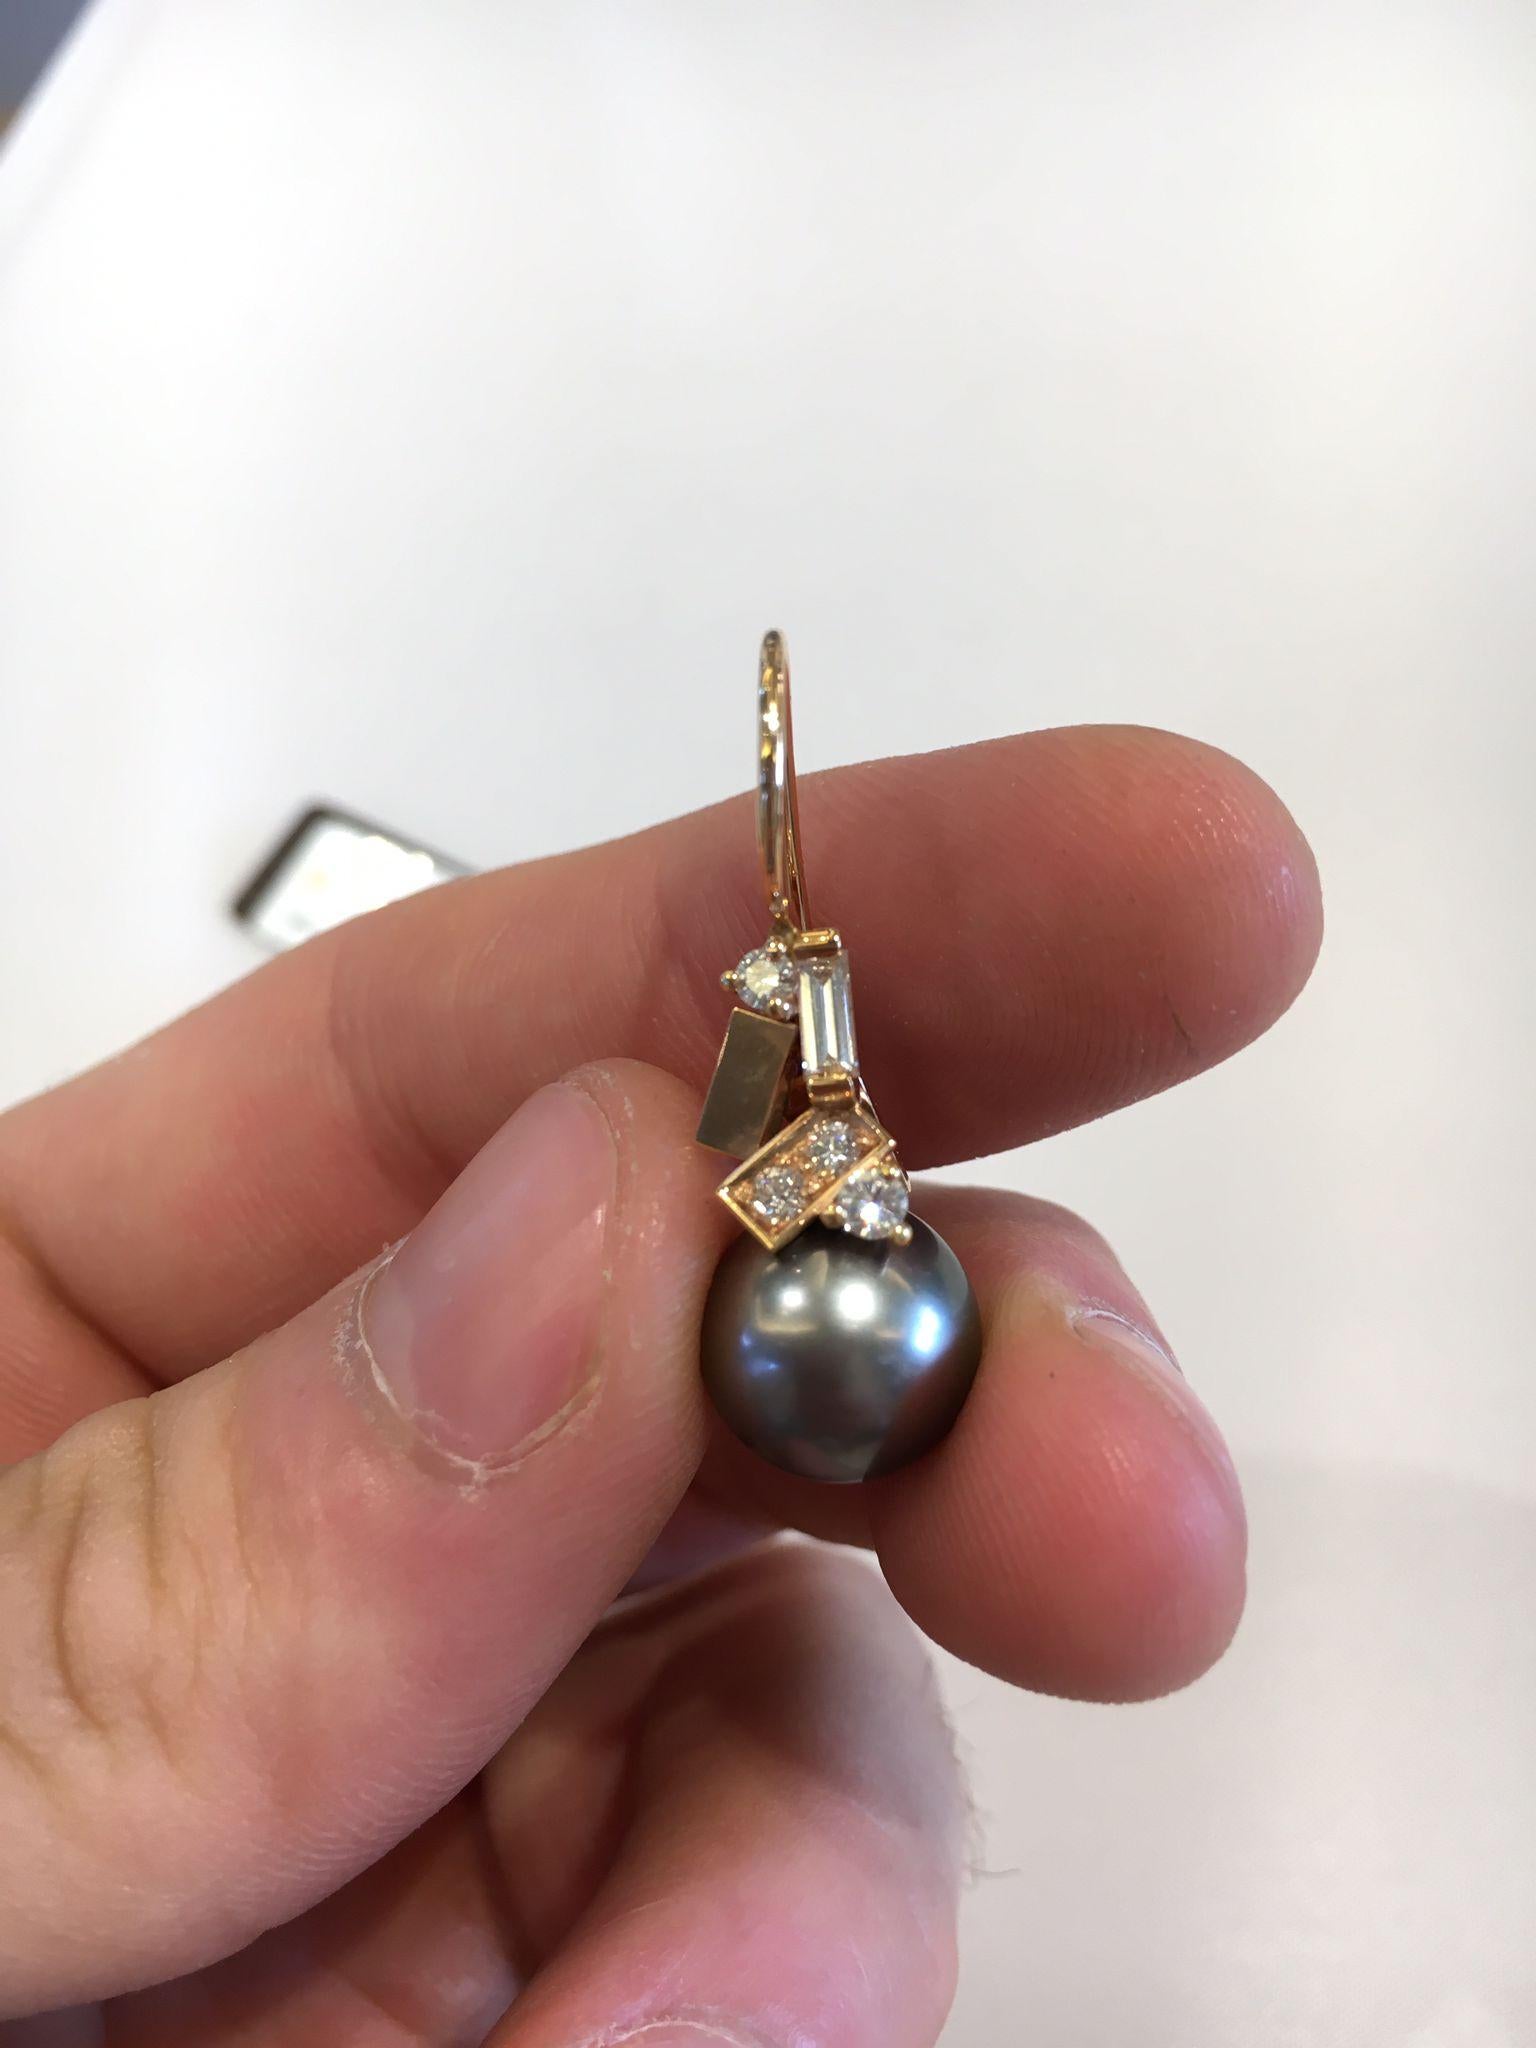 Brilliant Cut 5+A Thaitian dark pearl 18kt yellow gold with diamond earring by mikimoto. For Sale